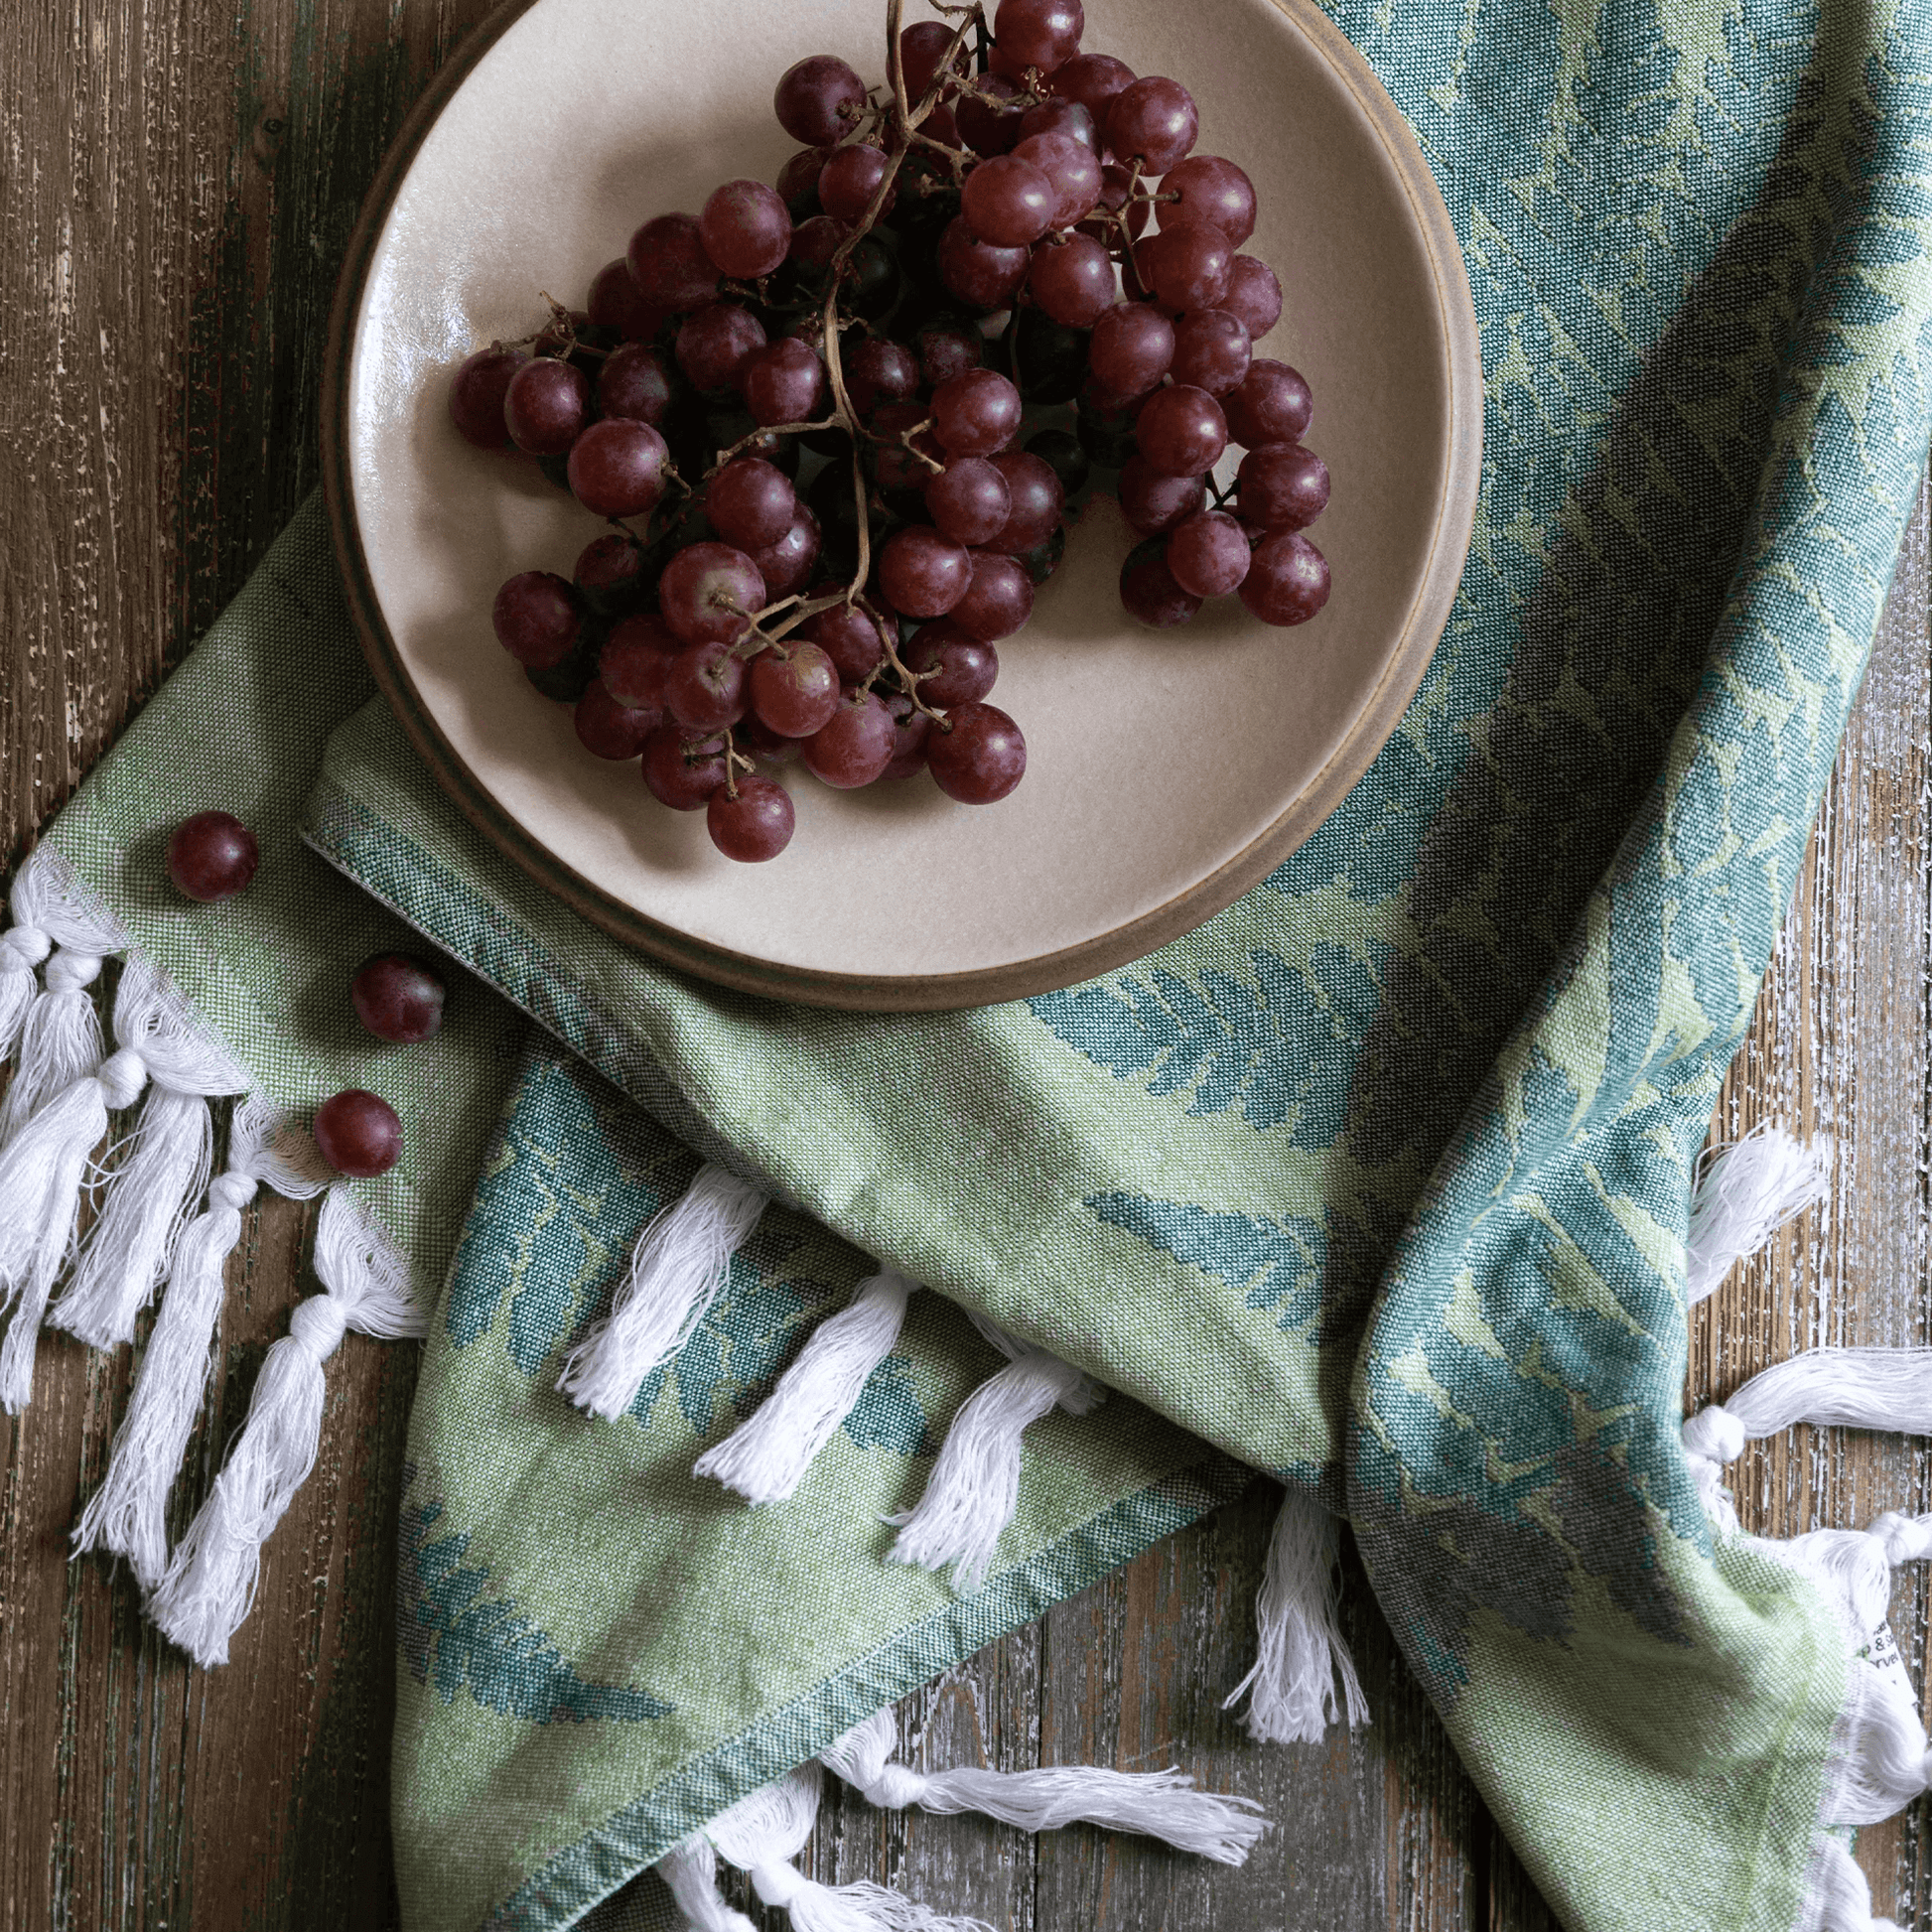 Green Turkish Hand Towel with grapes